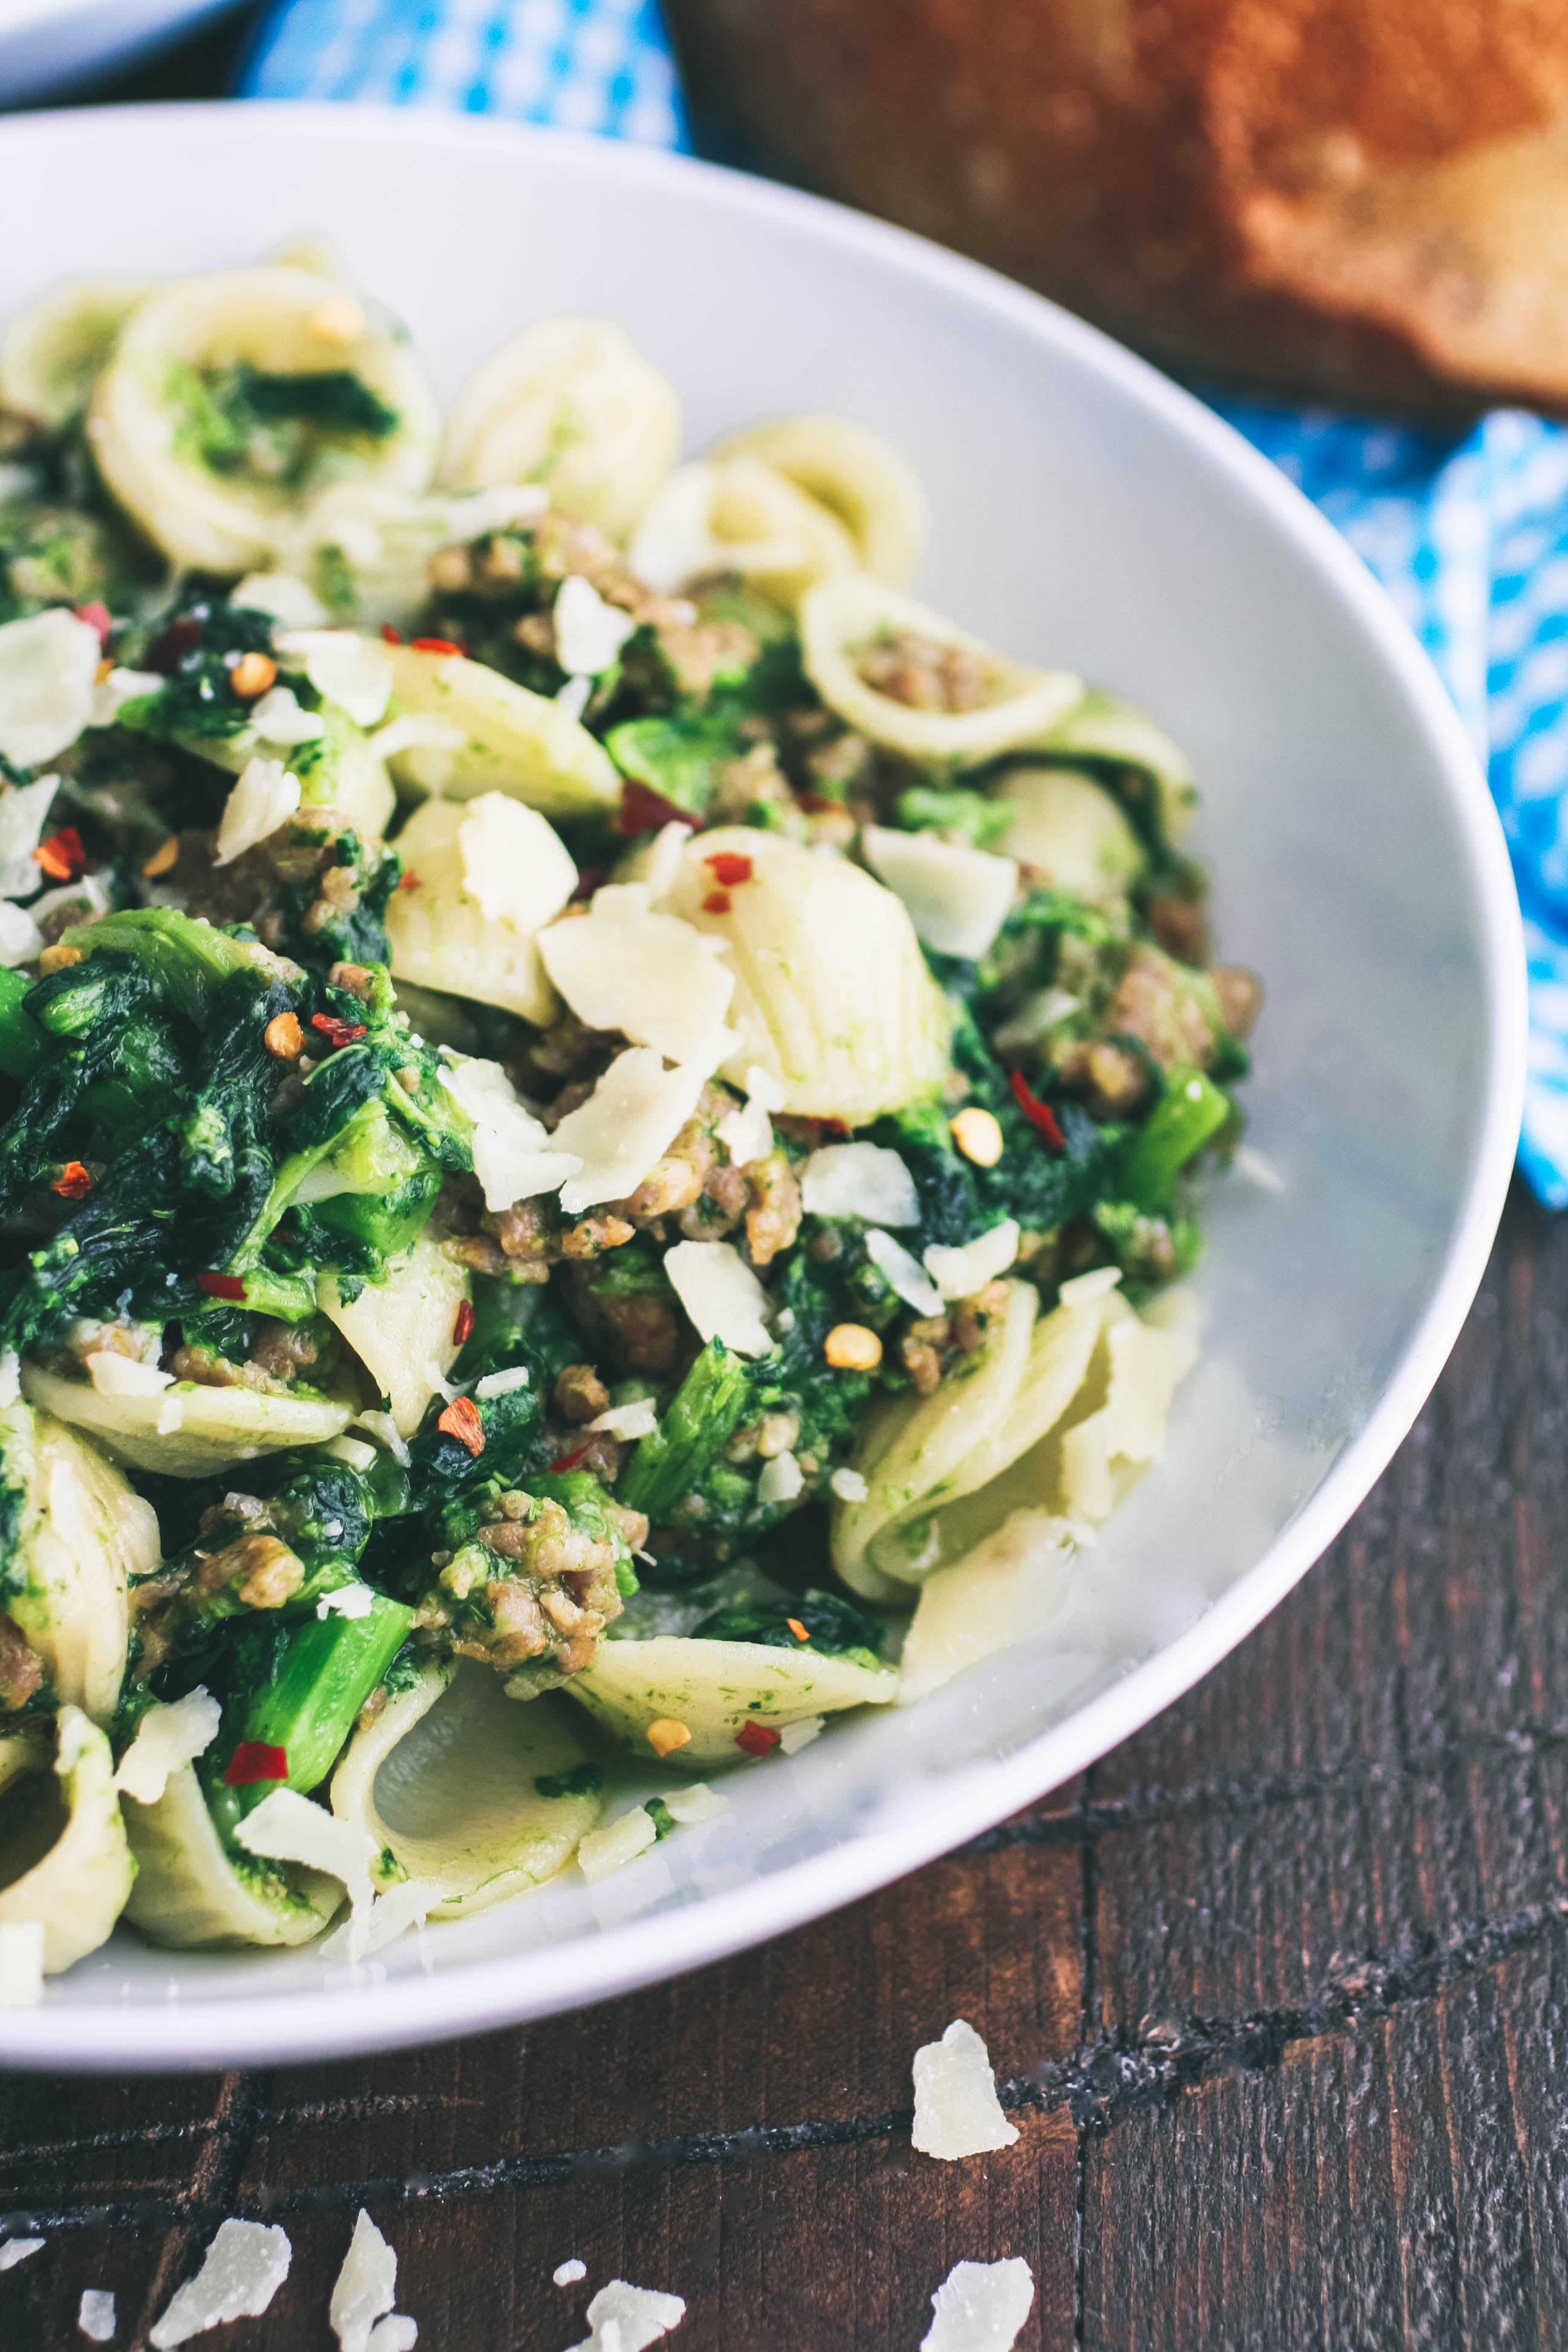 Pasta with Sausage and Rapini is a tasty dish for any night of the week. Pasta with Sausage and Rapini makes a tasty dish for any meal.